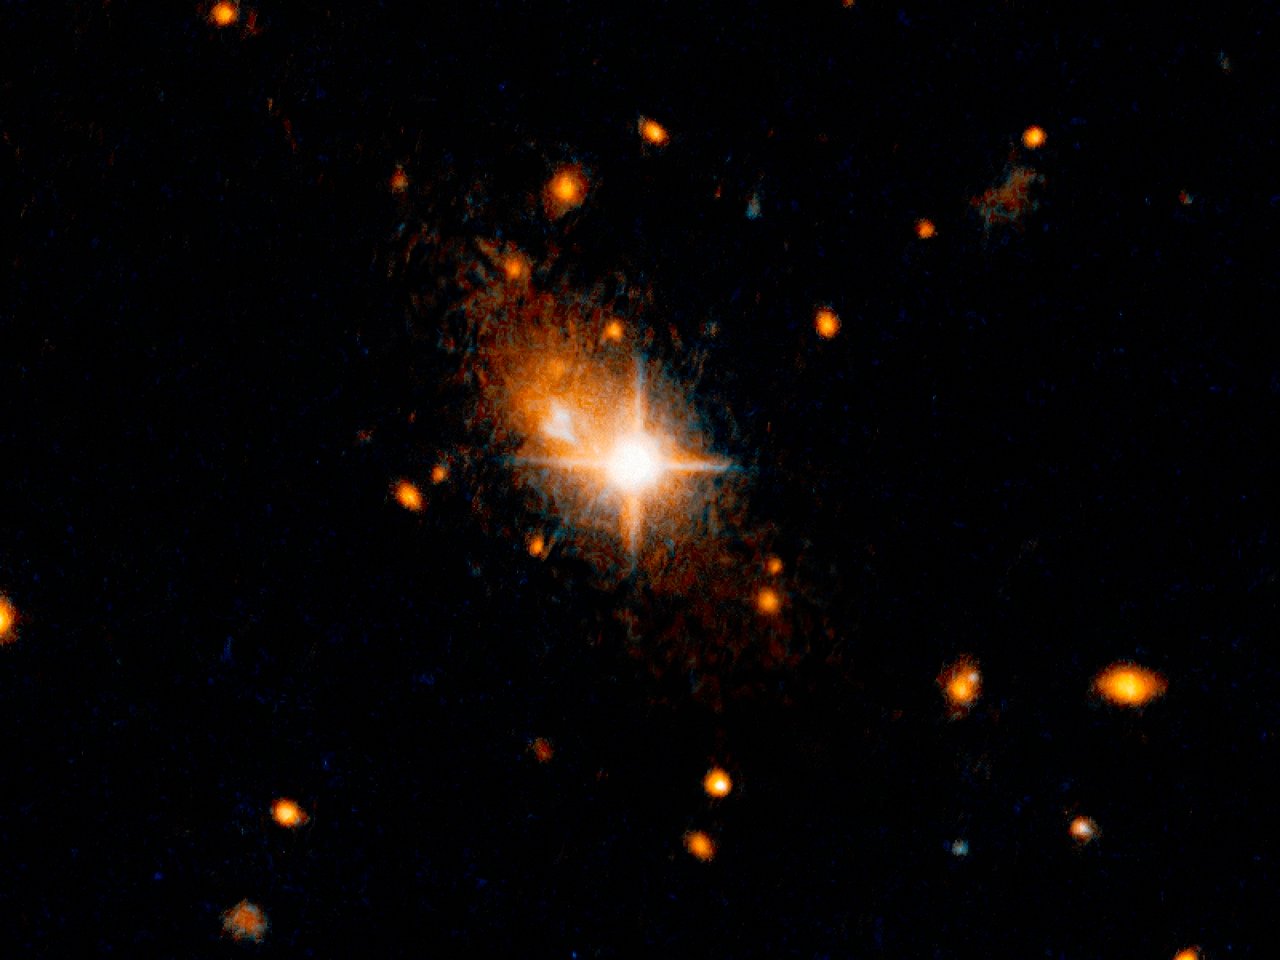 Galaxy with an ejected supermassive black hole